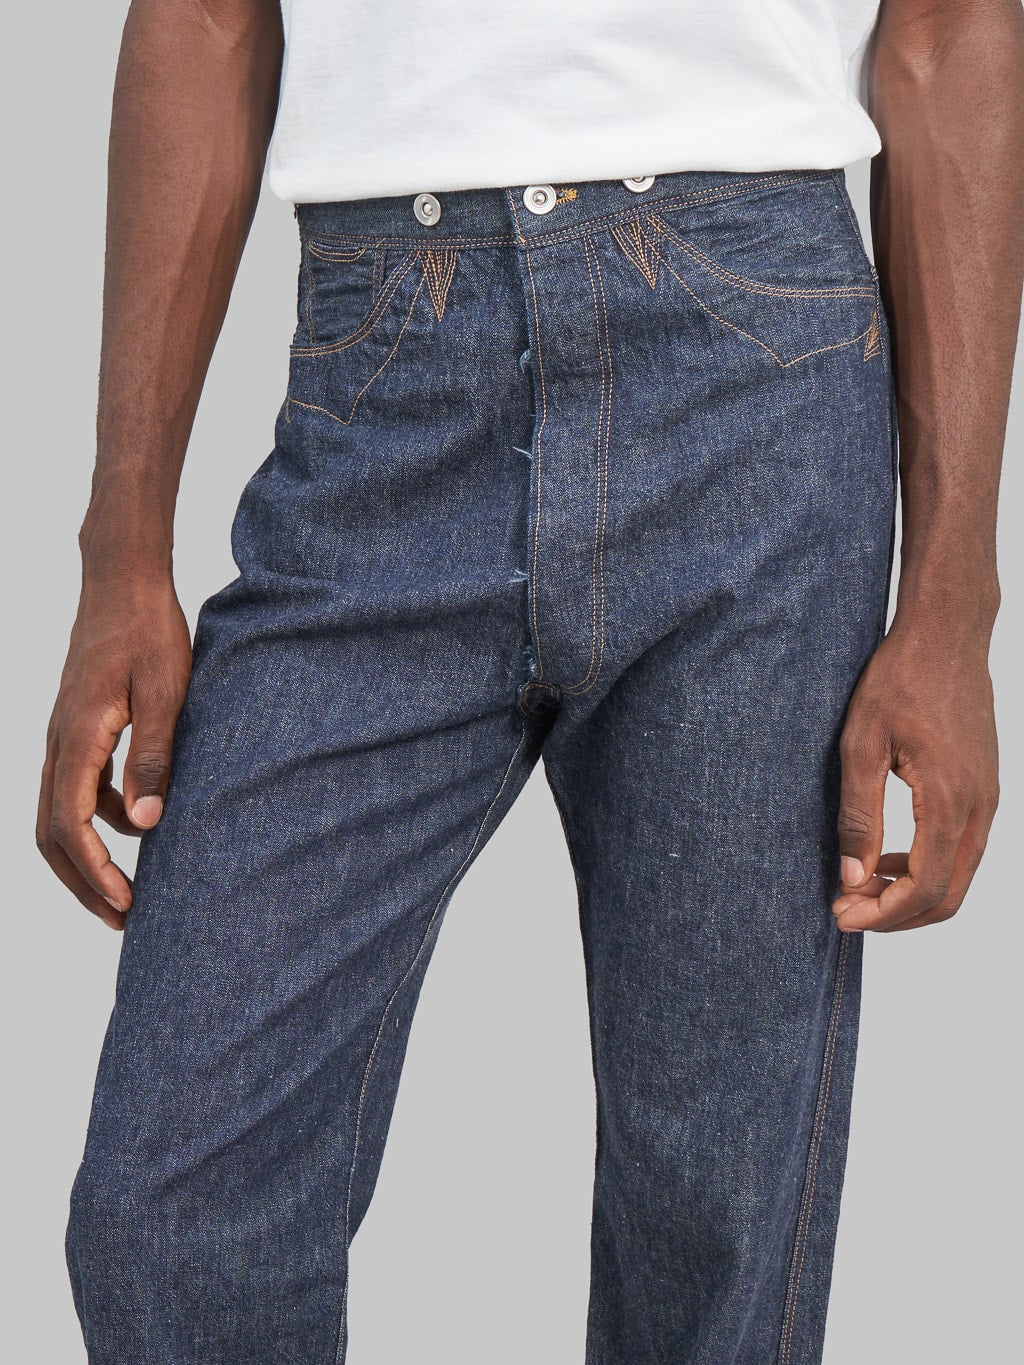 TCB Good Luck Wide Straight Jeans rise